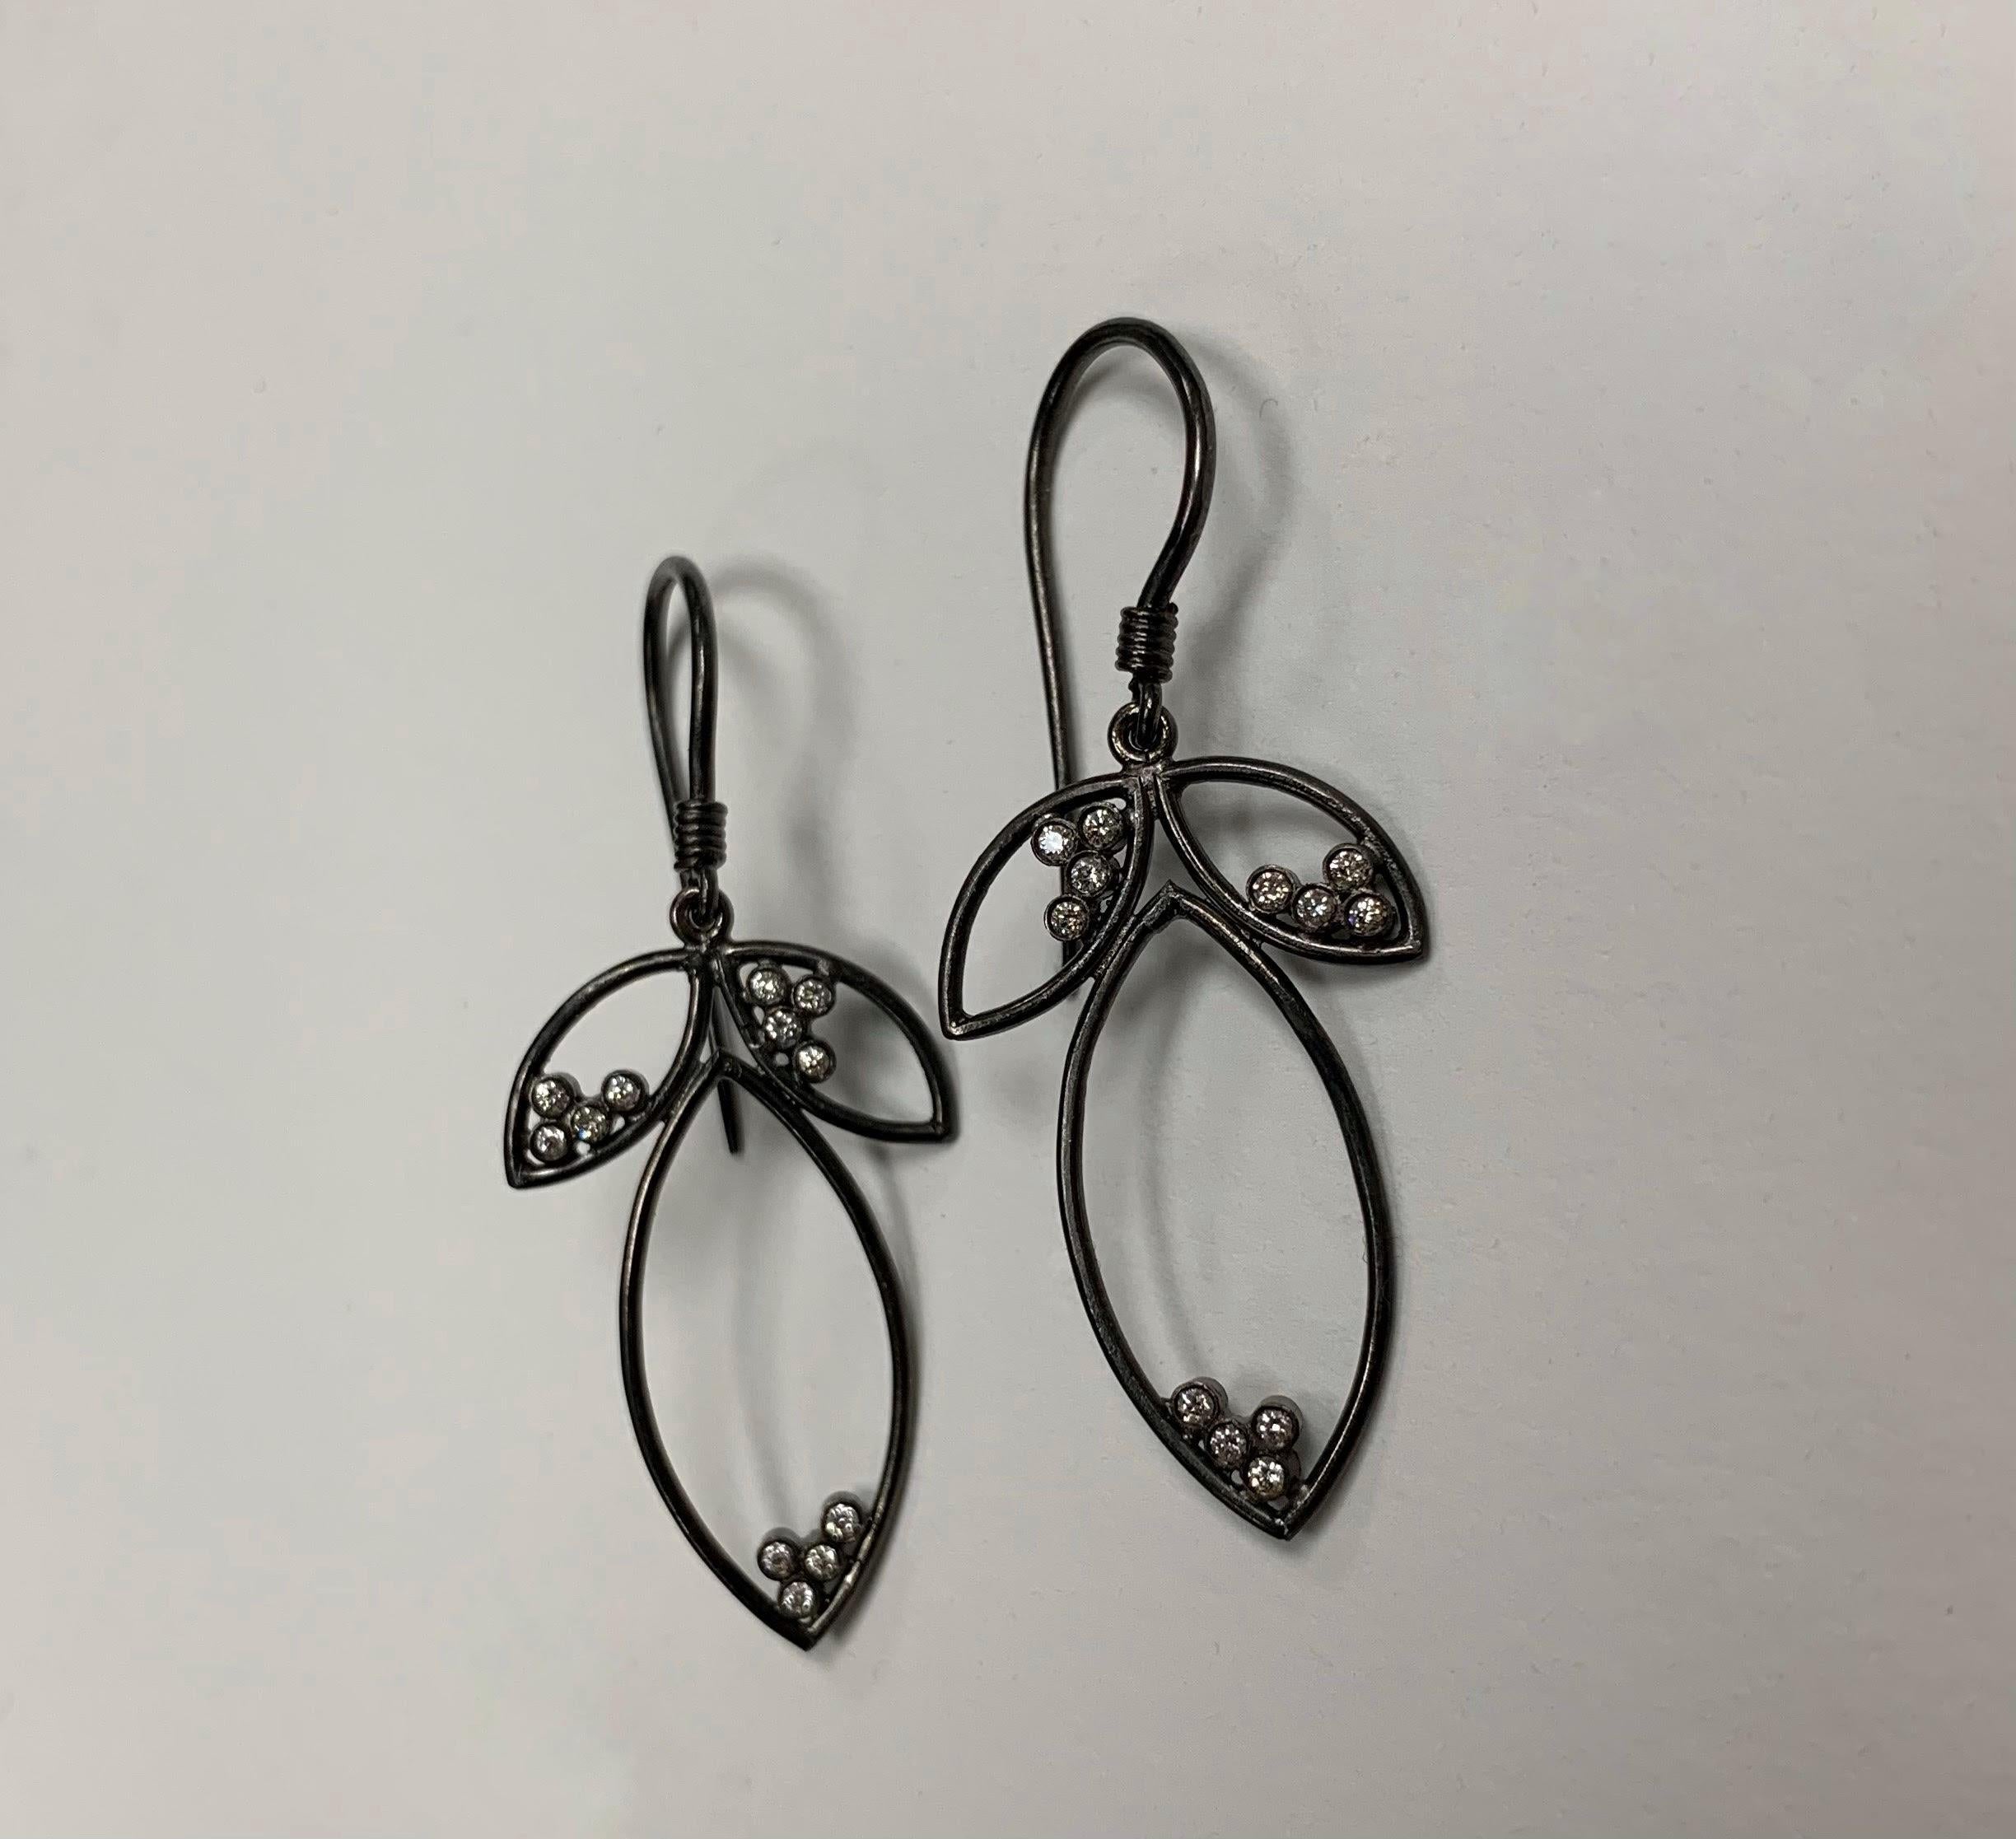 The 18 karat Blackened Gold dangle earrings feature 0.24 carats of White Diamonds. The diamonds are bezel set and appear to be dew drops on the leaves. The 3 leaves are connected at the top and the earrings finish on the ear on french wire.

A2 by